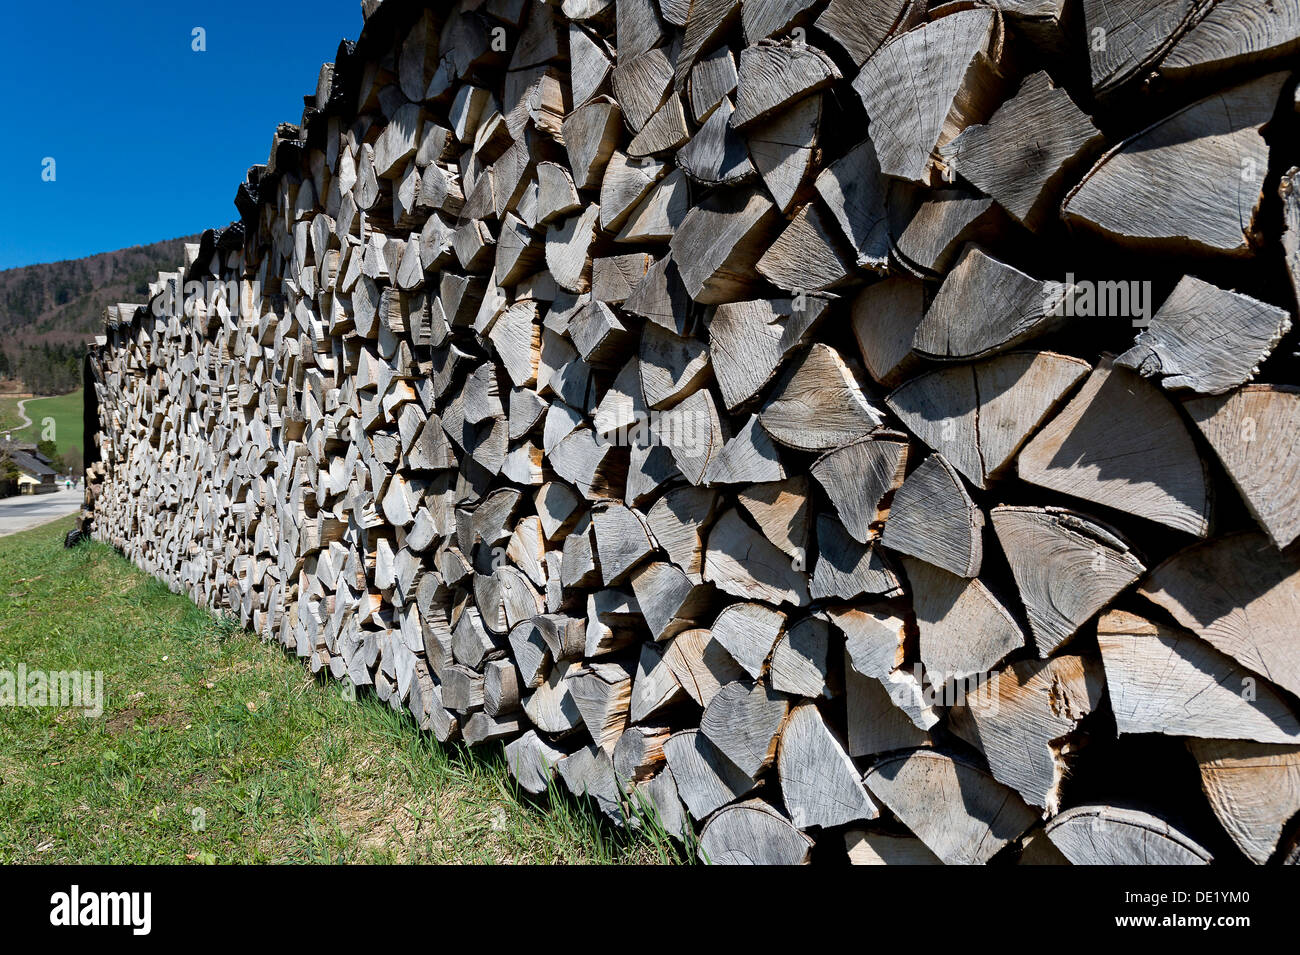 Piled-up firewood, logs, Ried am Wolfgangsee, Salzburg State, Austria Stock Photo